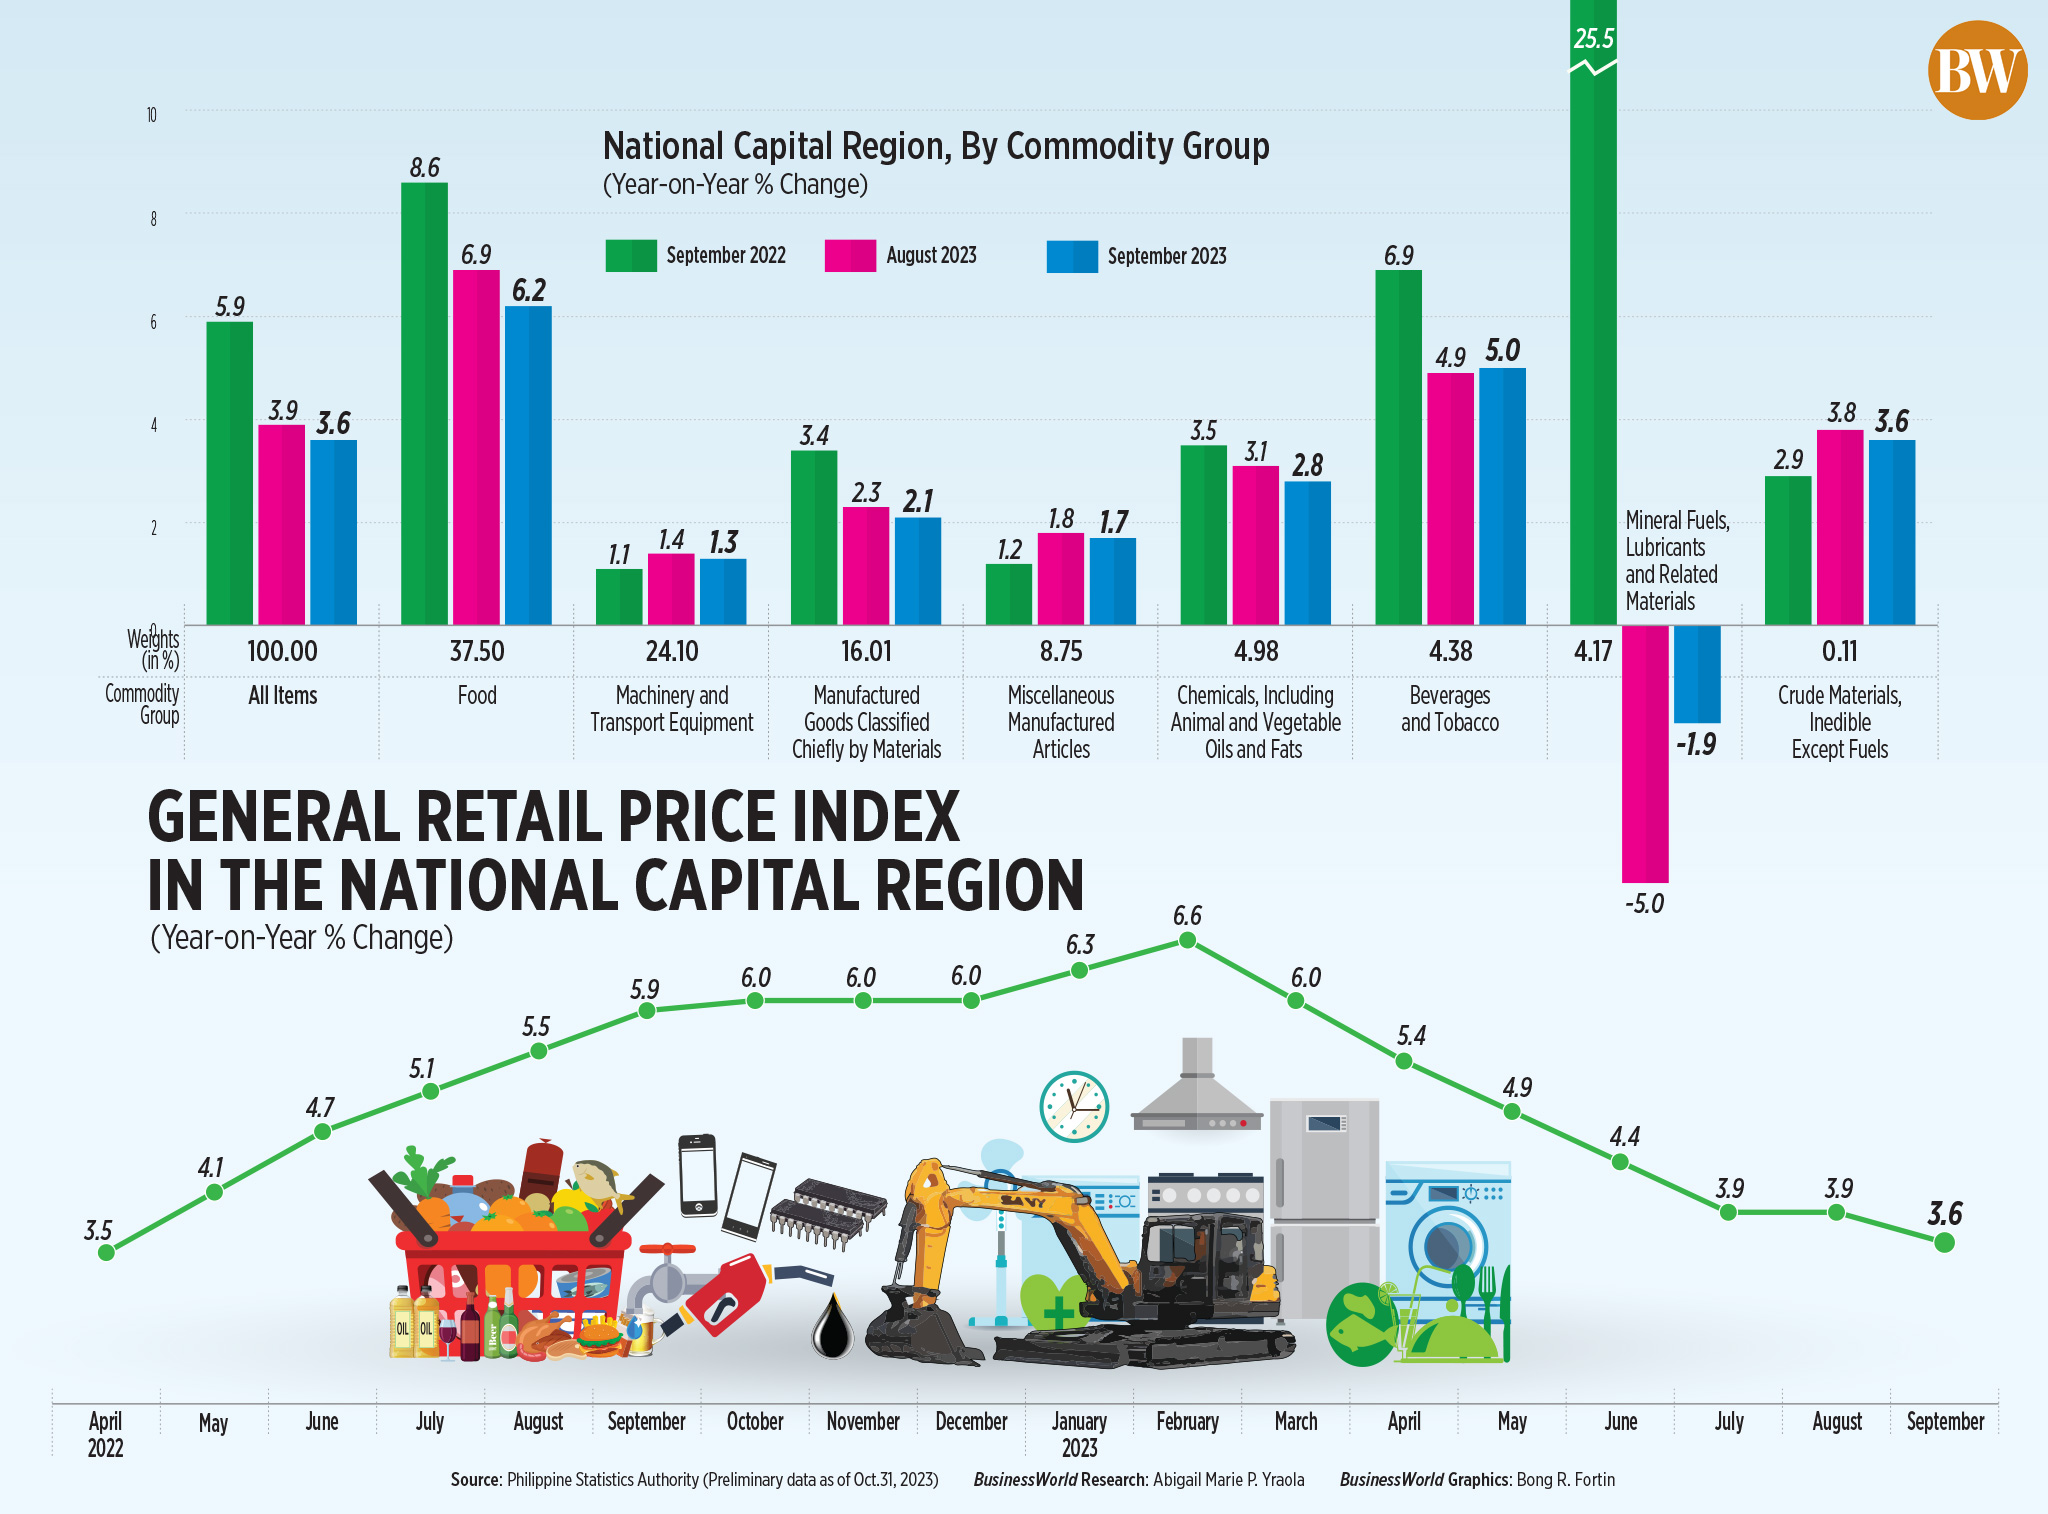 General Retail Price Index in the National Capital Region